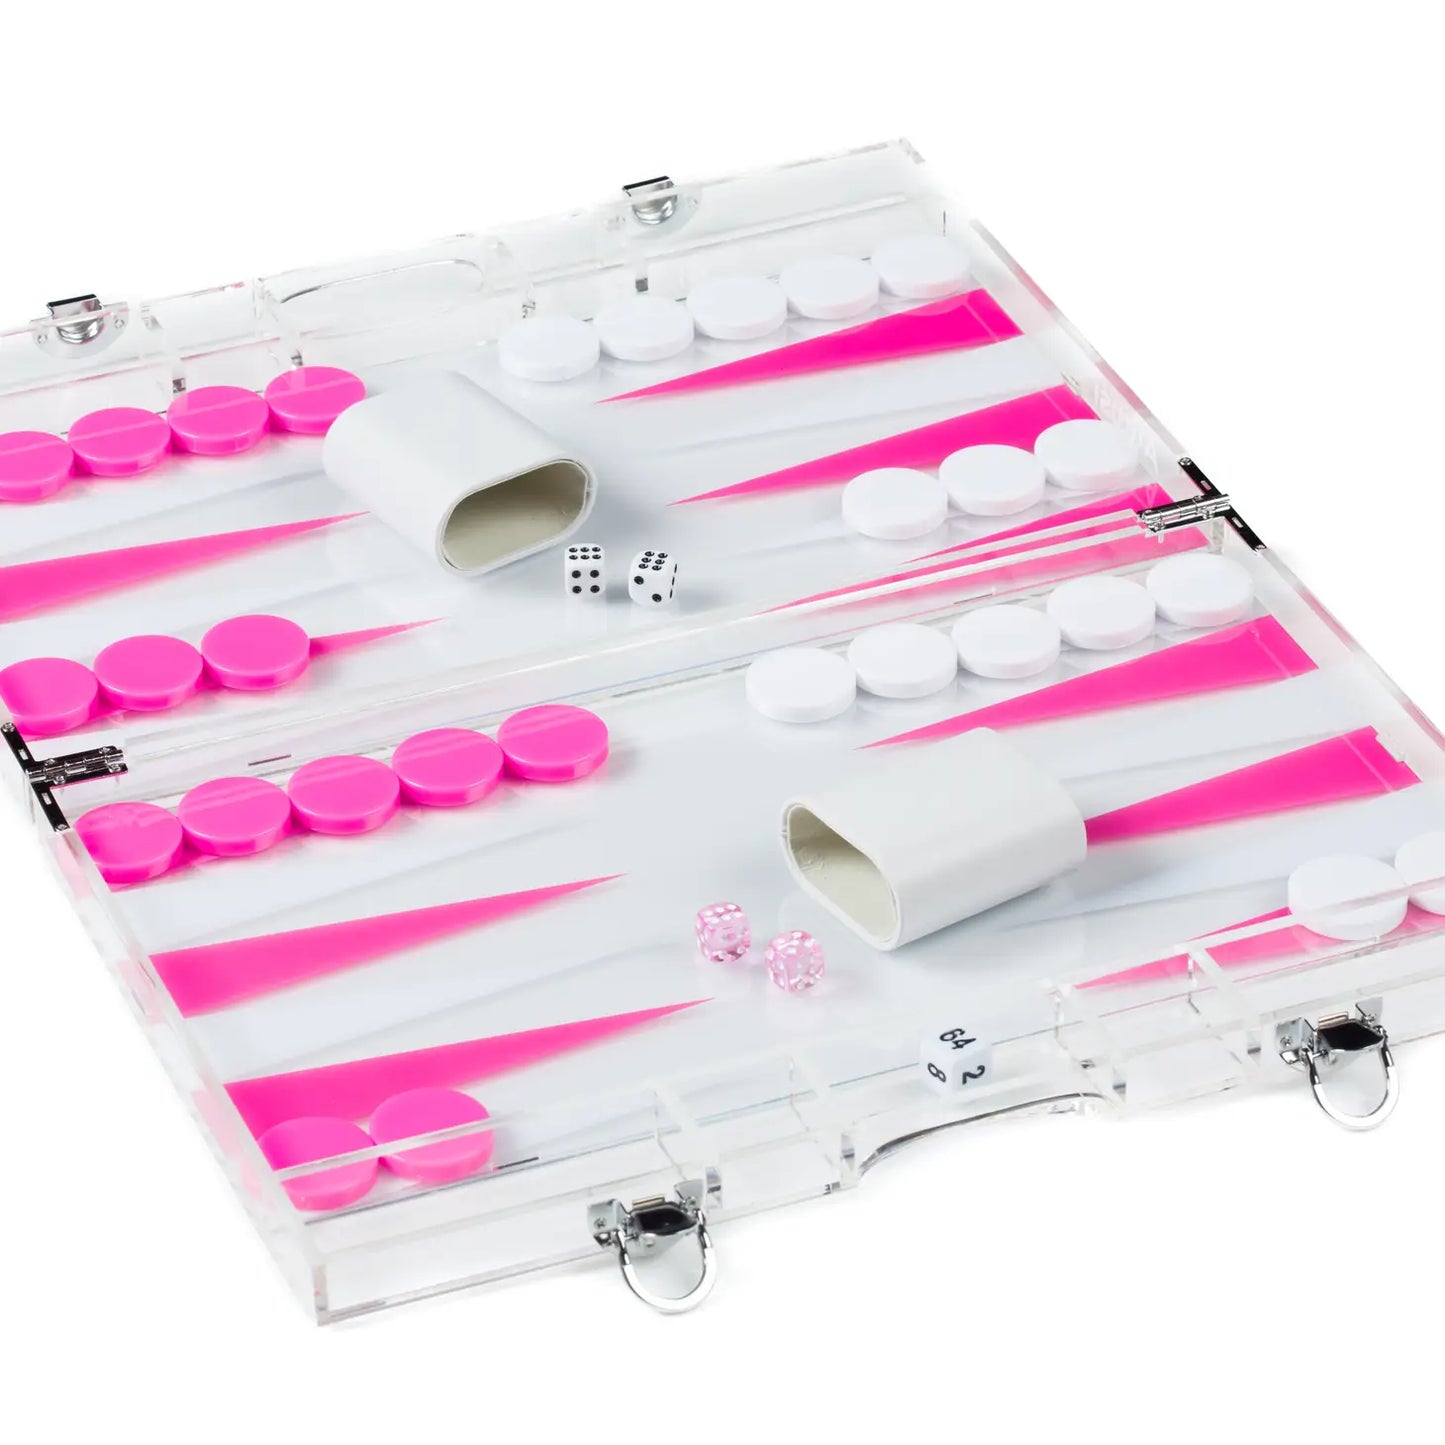 Acrylic Clear Backgammon Set in Pink and White